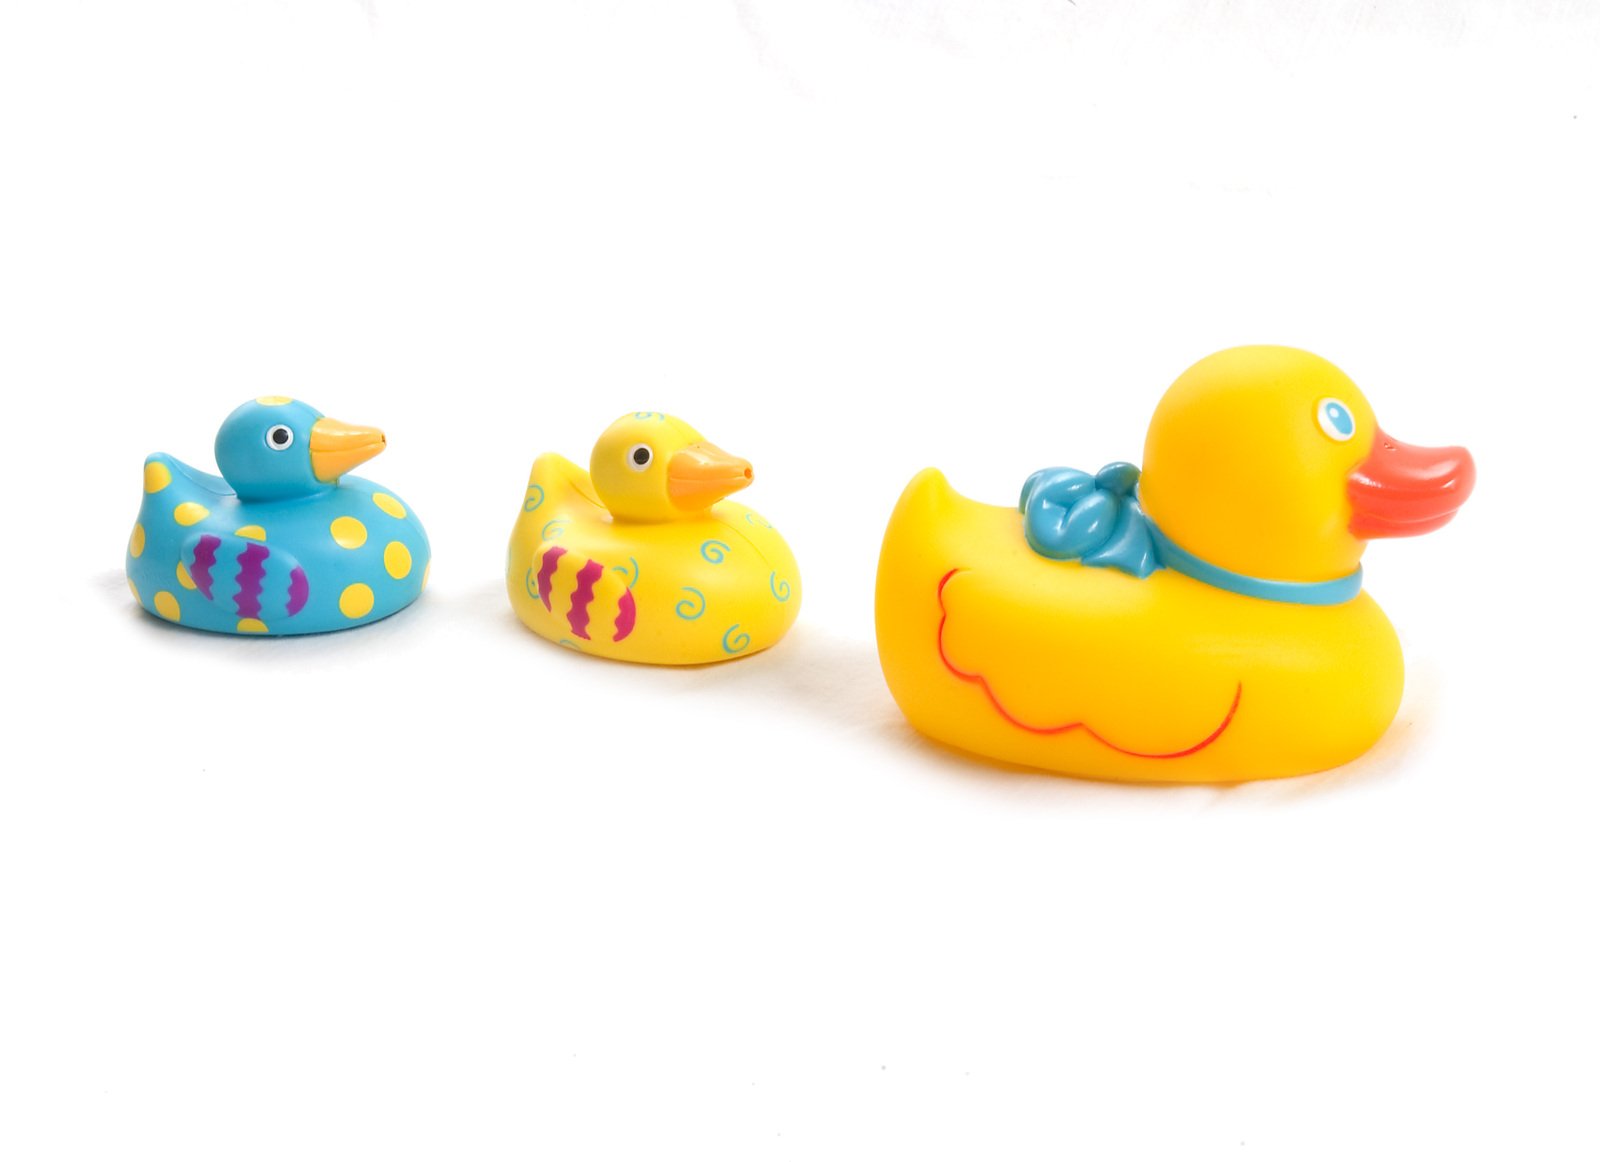 three rubber ducks and two rubber rubber toy ducks